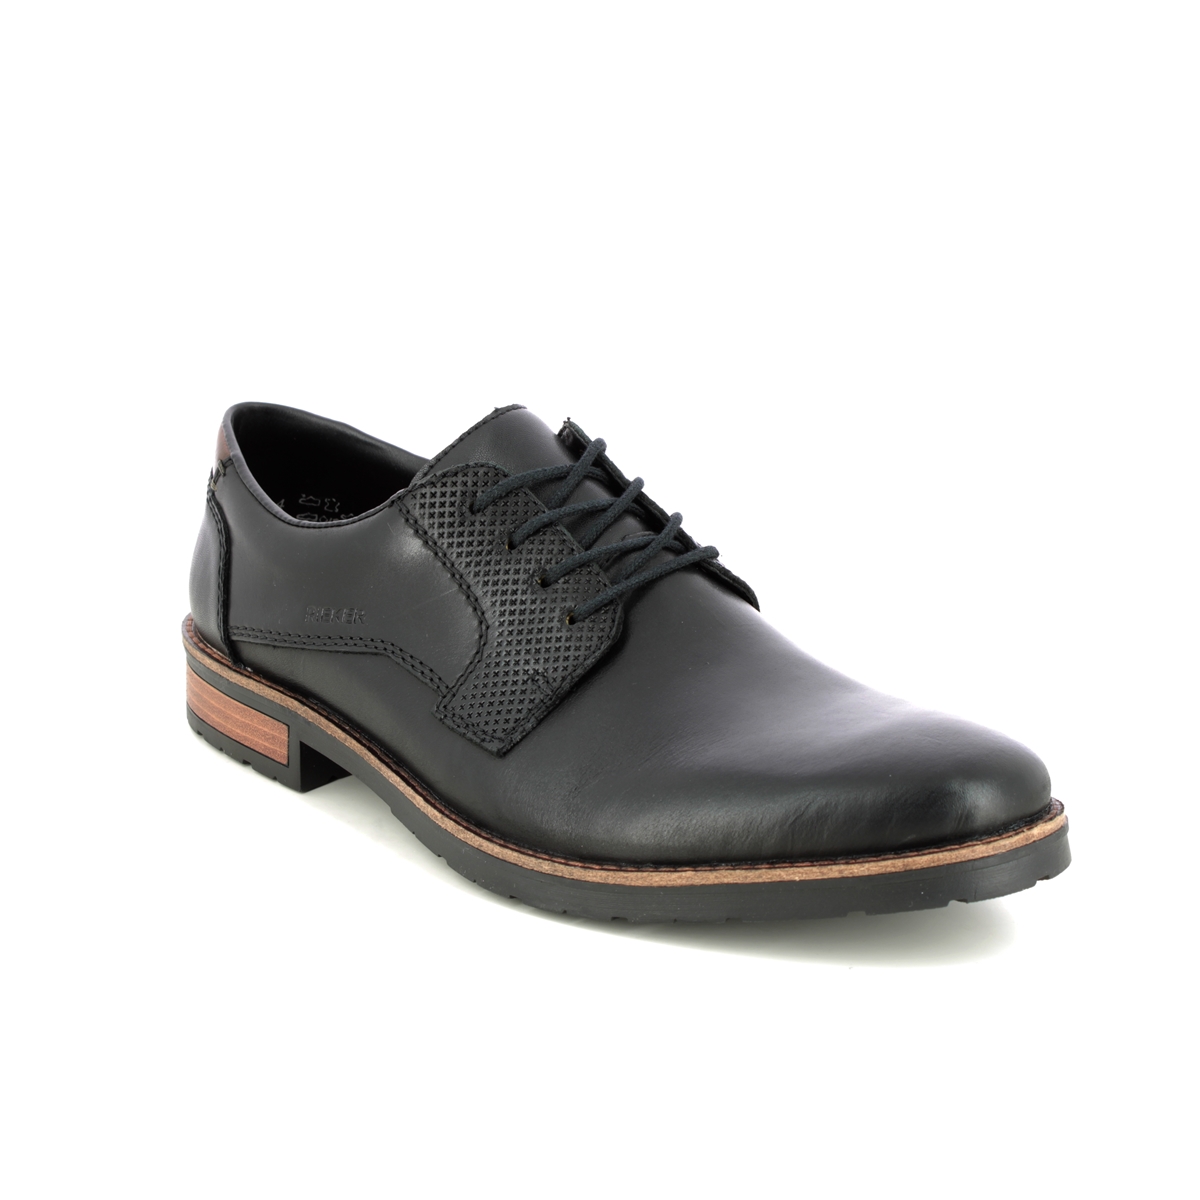 Rieker Claradam Black Leather Mens Formal Shoes 14601-00 In Size 45 In Plain Black Leather